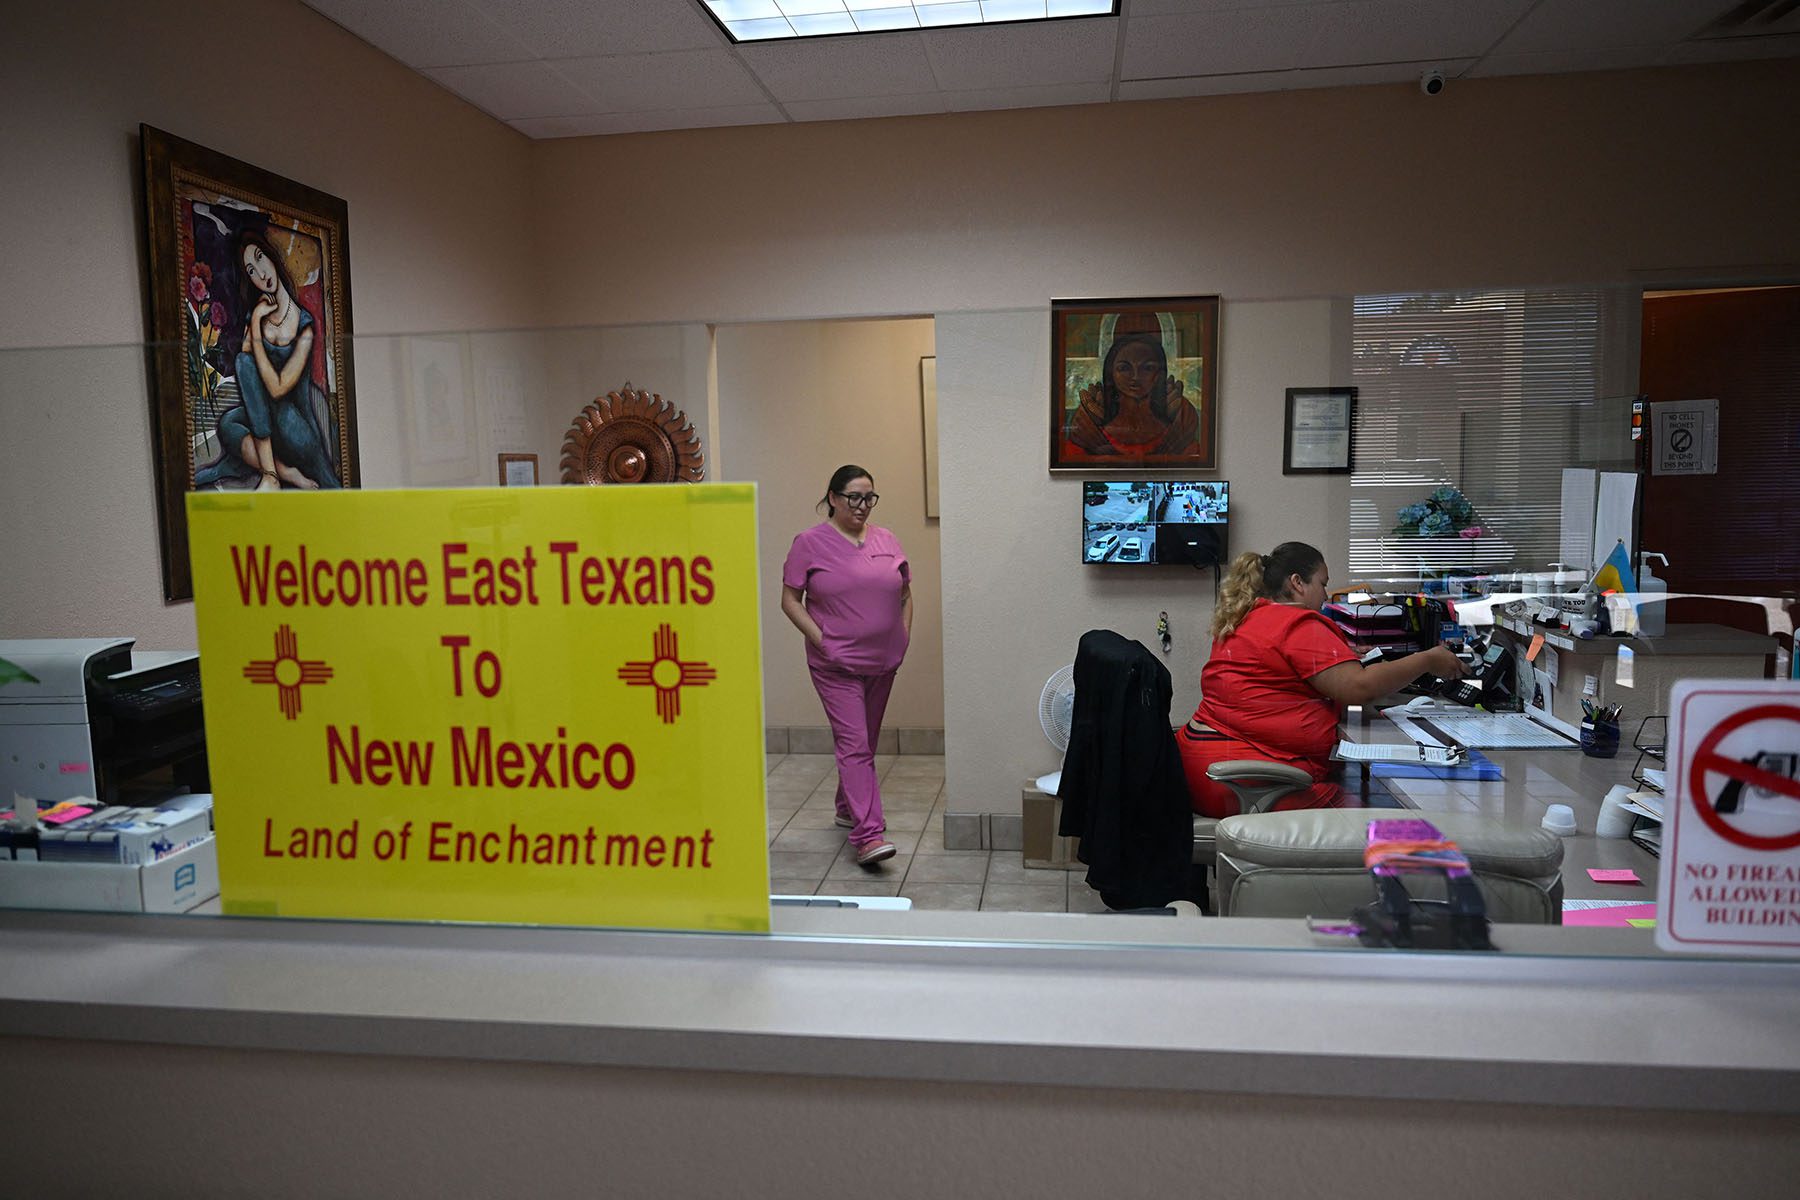 A sign welcoming patients from East Texas is displayed in the waiting area of the Women's Reproductive Clinic in Santa Teresa, New Mexico.